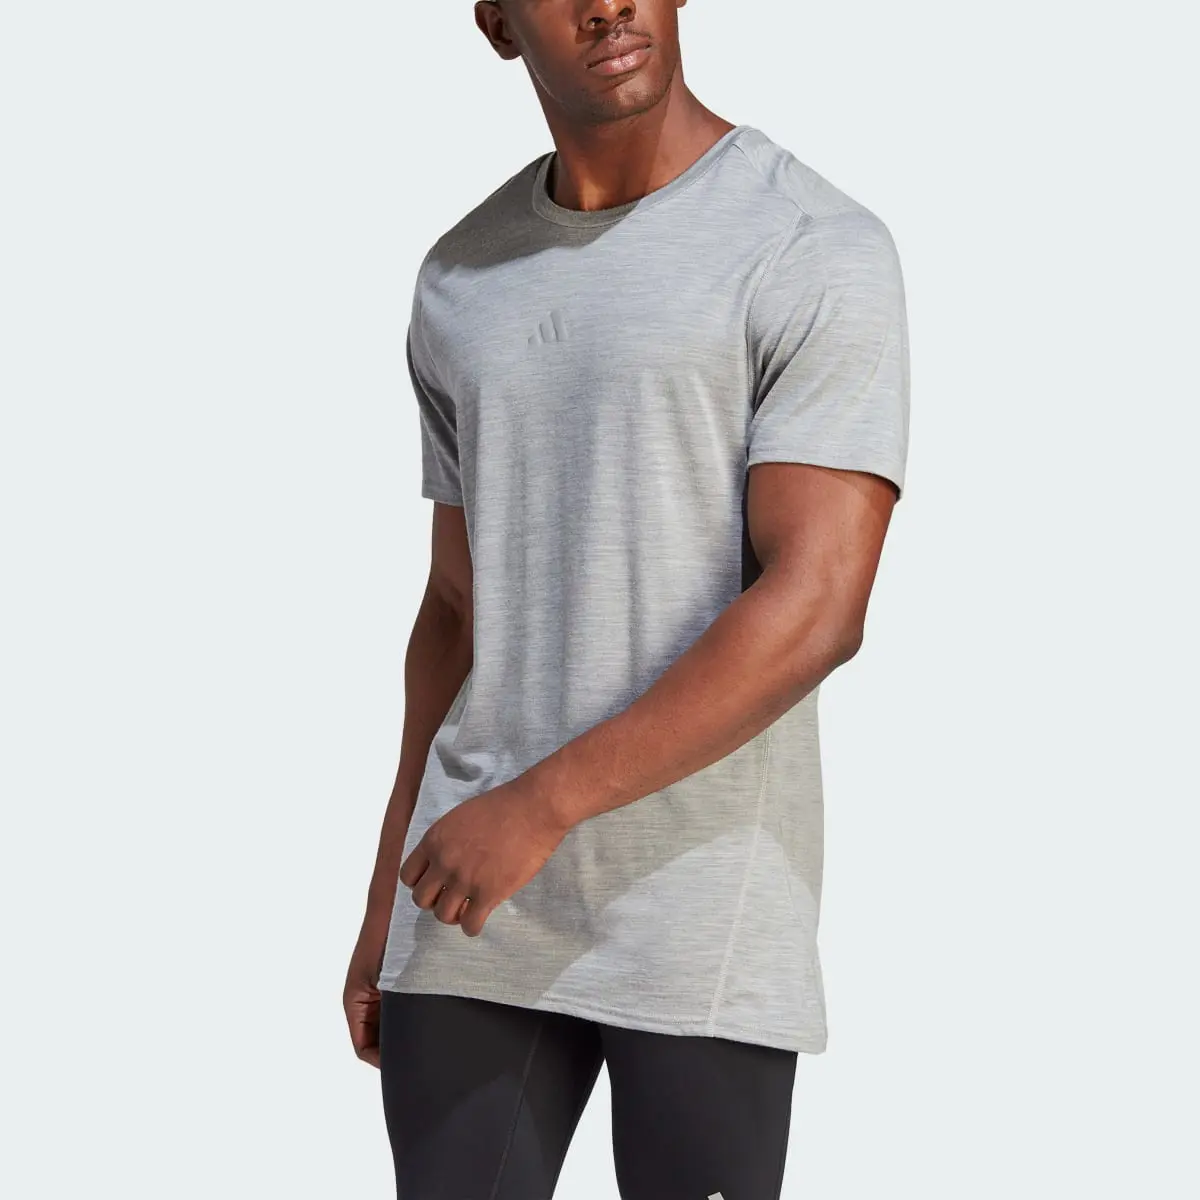 Adidas Ultimate Running Conquer the Elements Merino Tee. 1